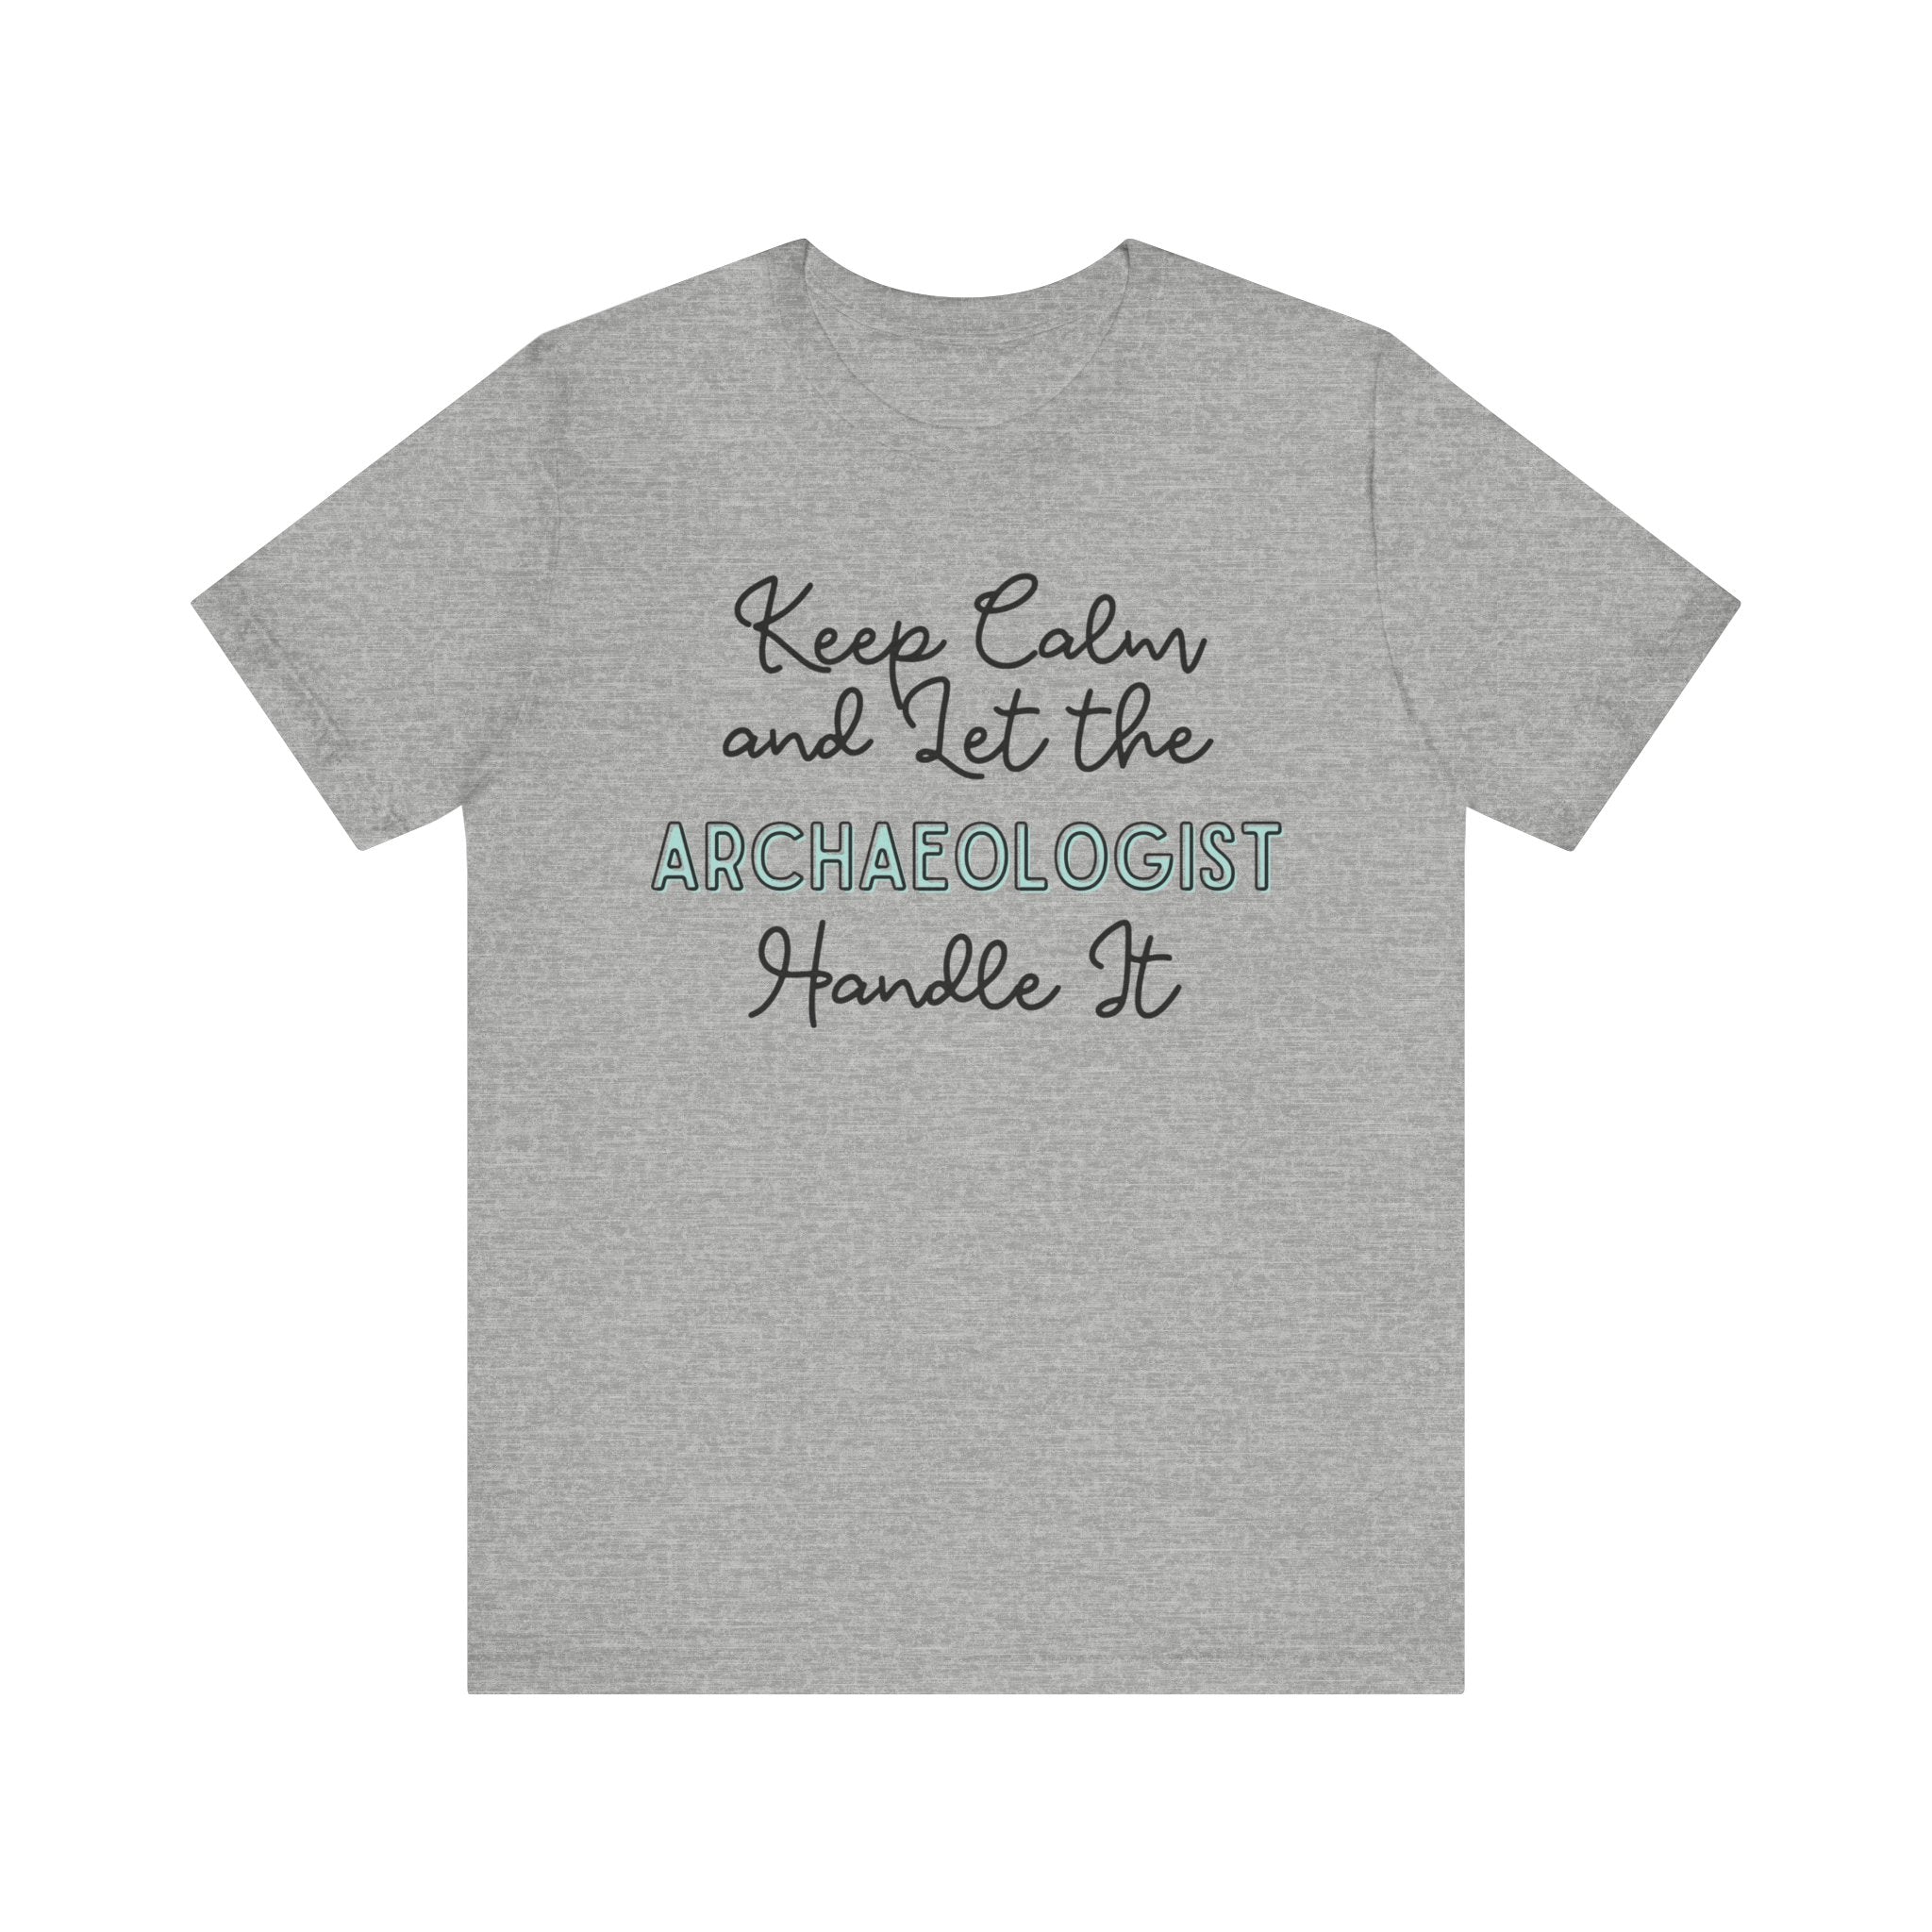 Keep Calm and let the Archaeologist handle It - Jersey Short Sleeve Tee